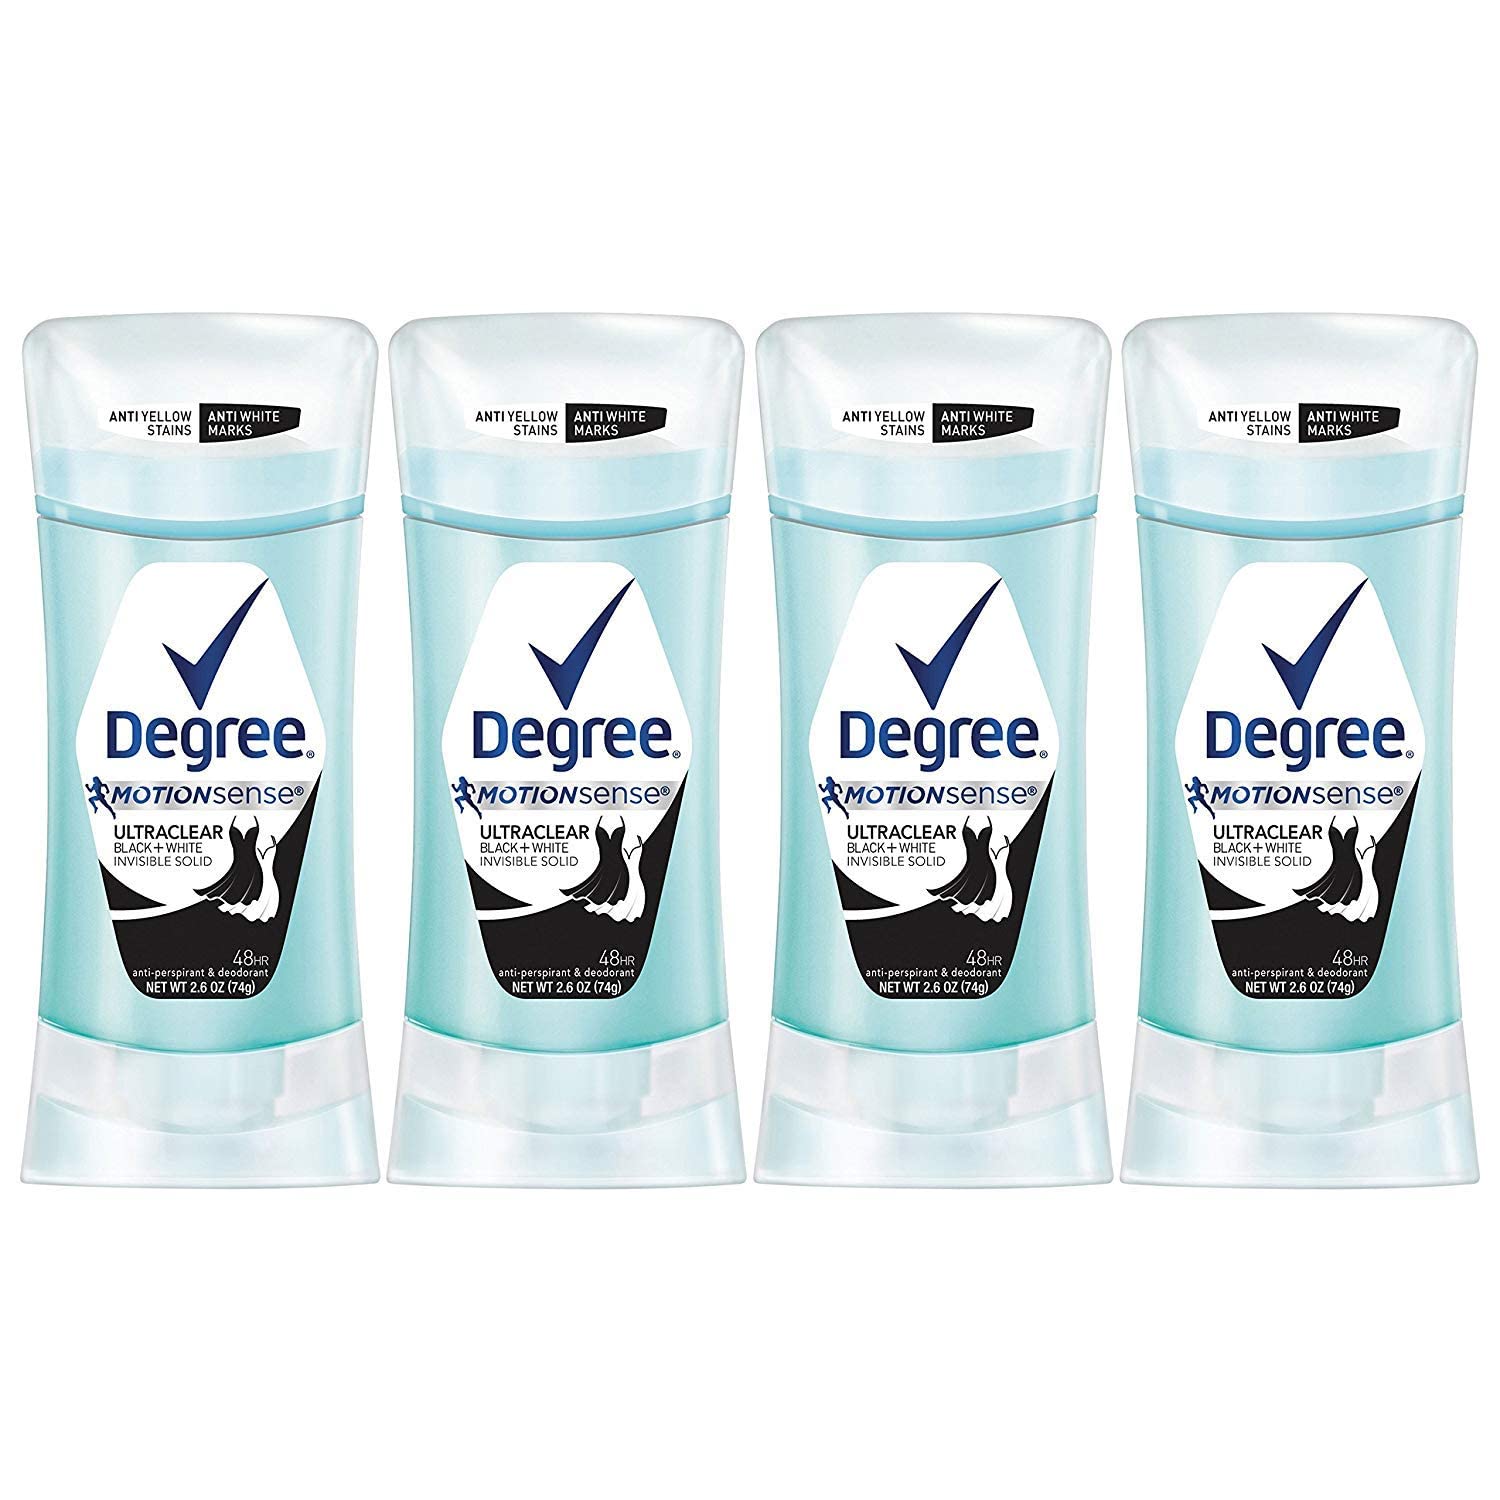 Degree UltraClear Antiperspirant for Women Protects from Deodorant Stains Black+White Deodorant for Women 2.6 Ounce (Pack of 4)